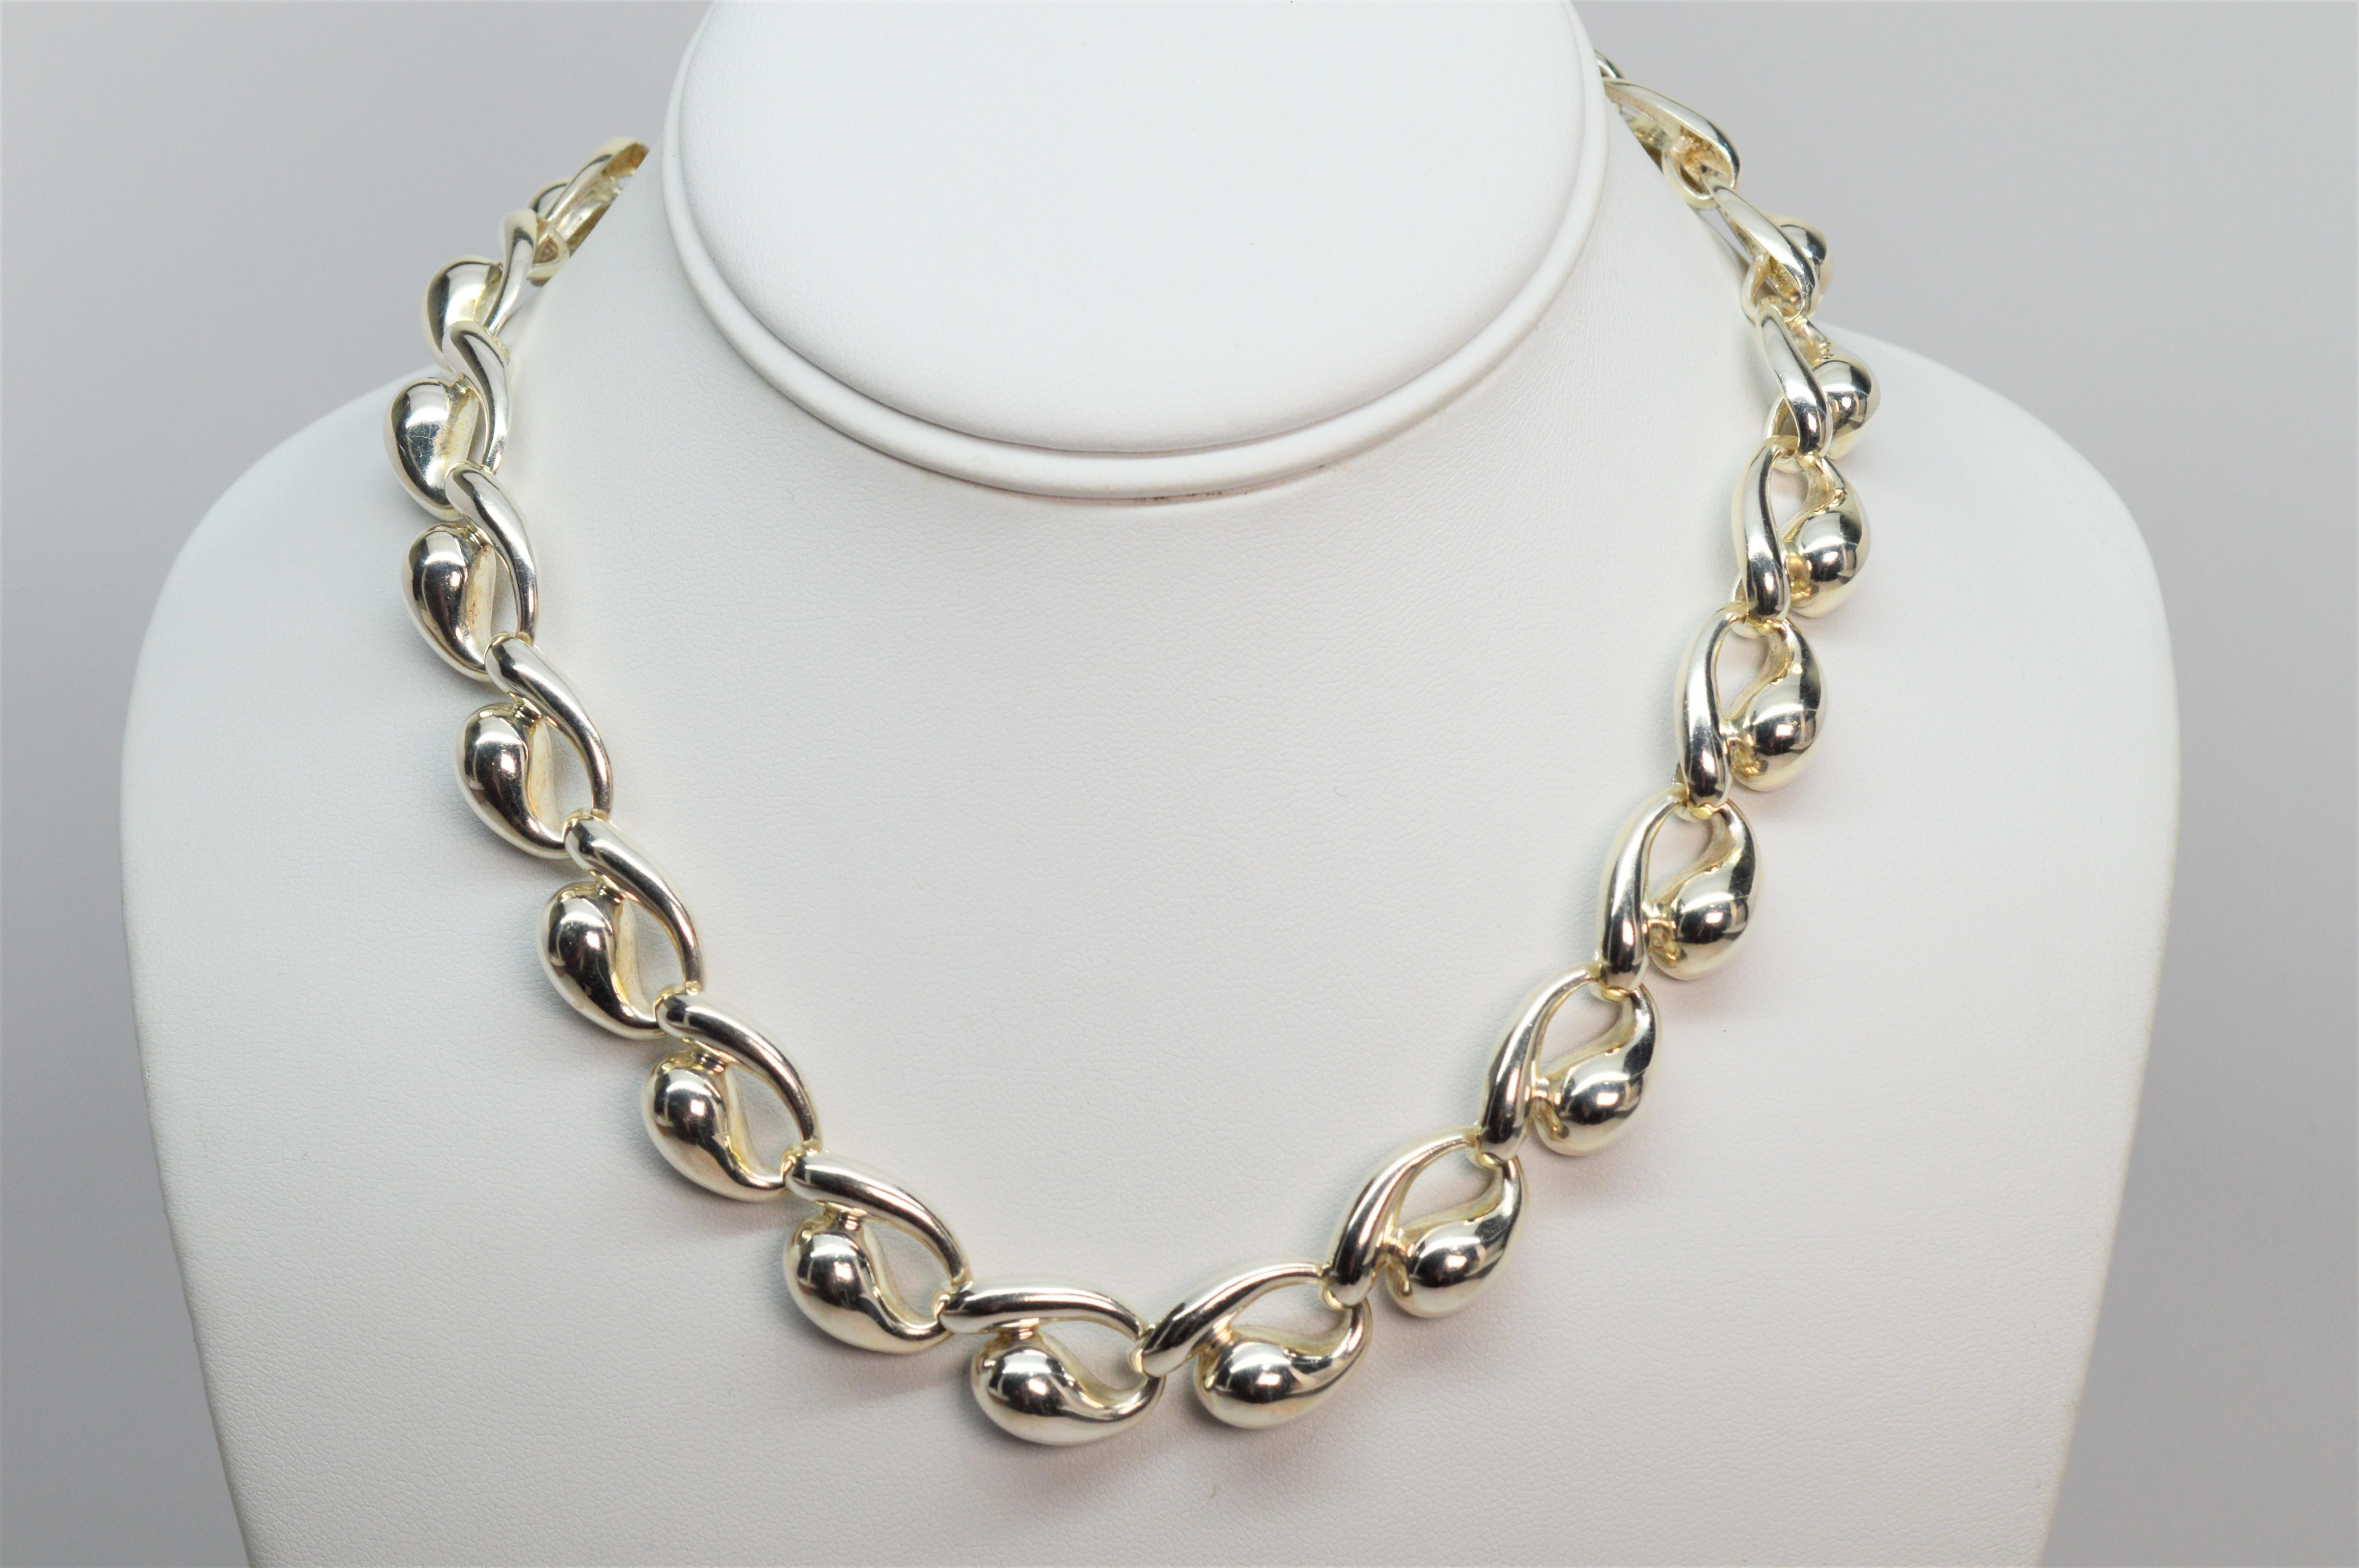 Charles Krypell Sculptured Sterling Silver Necklace In Excellent Condition For Sale In Mount Kisco, NY